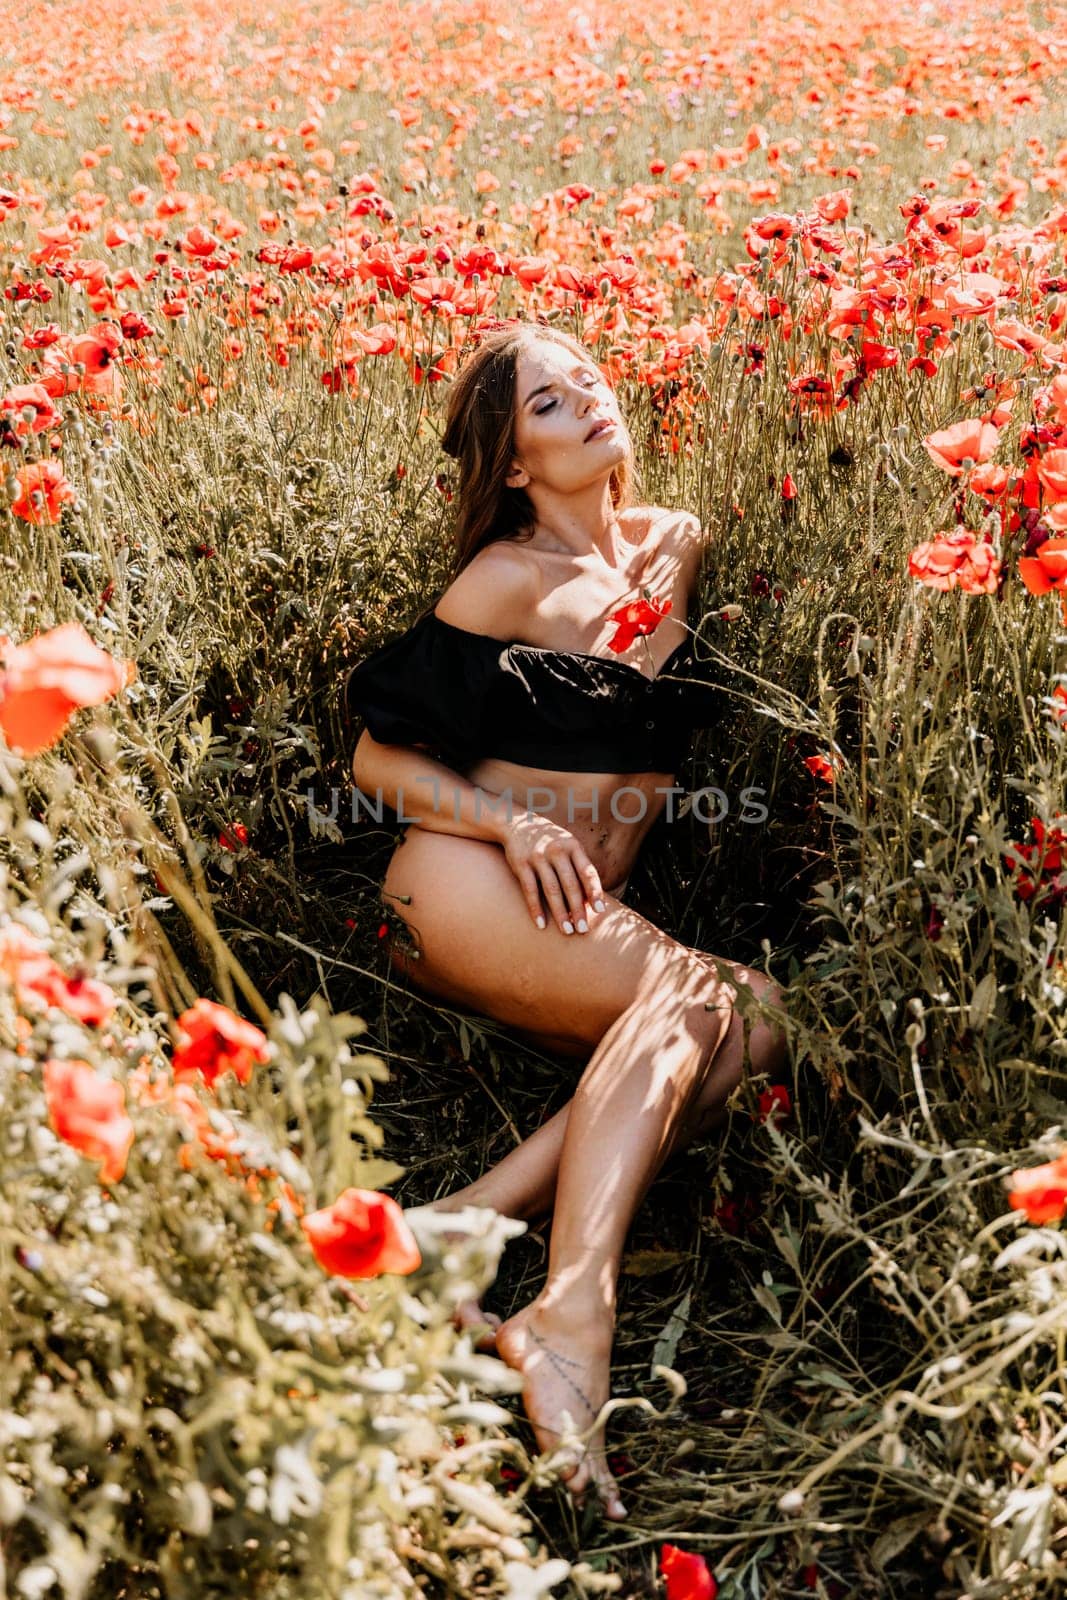 Woman poppies field. Happy woman undressed lies in a red poppy field, summer time.